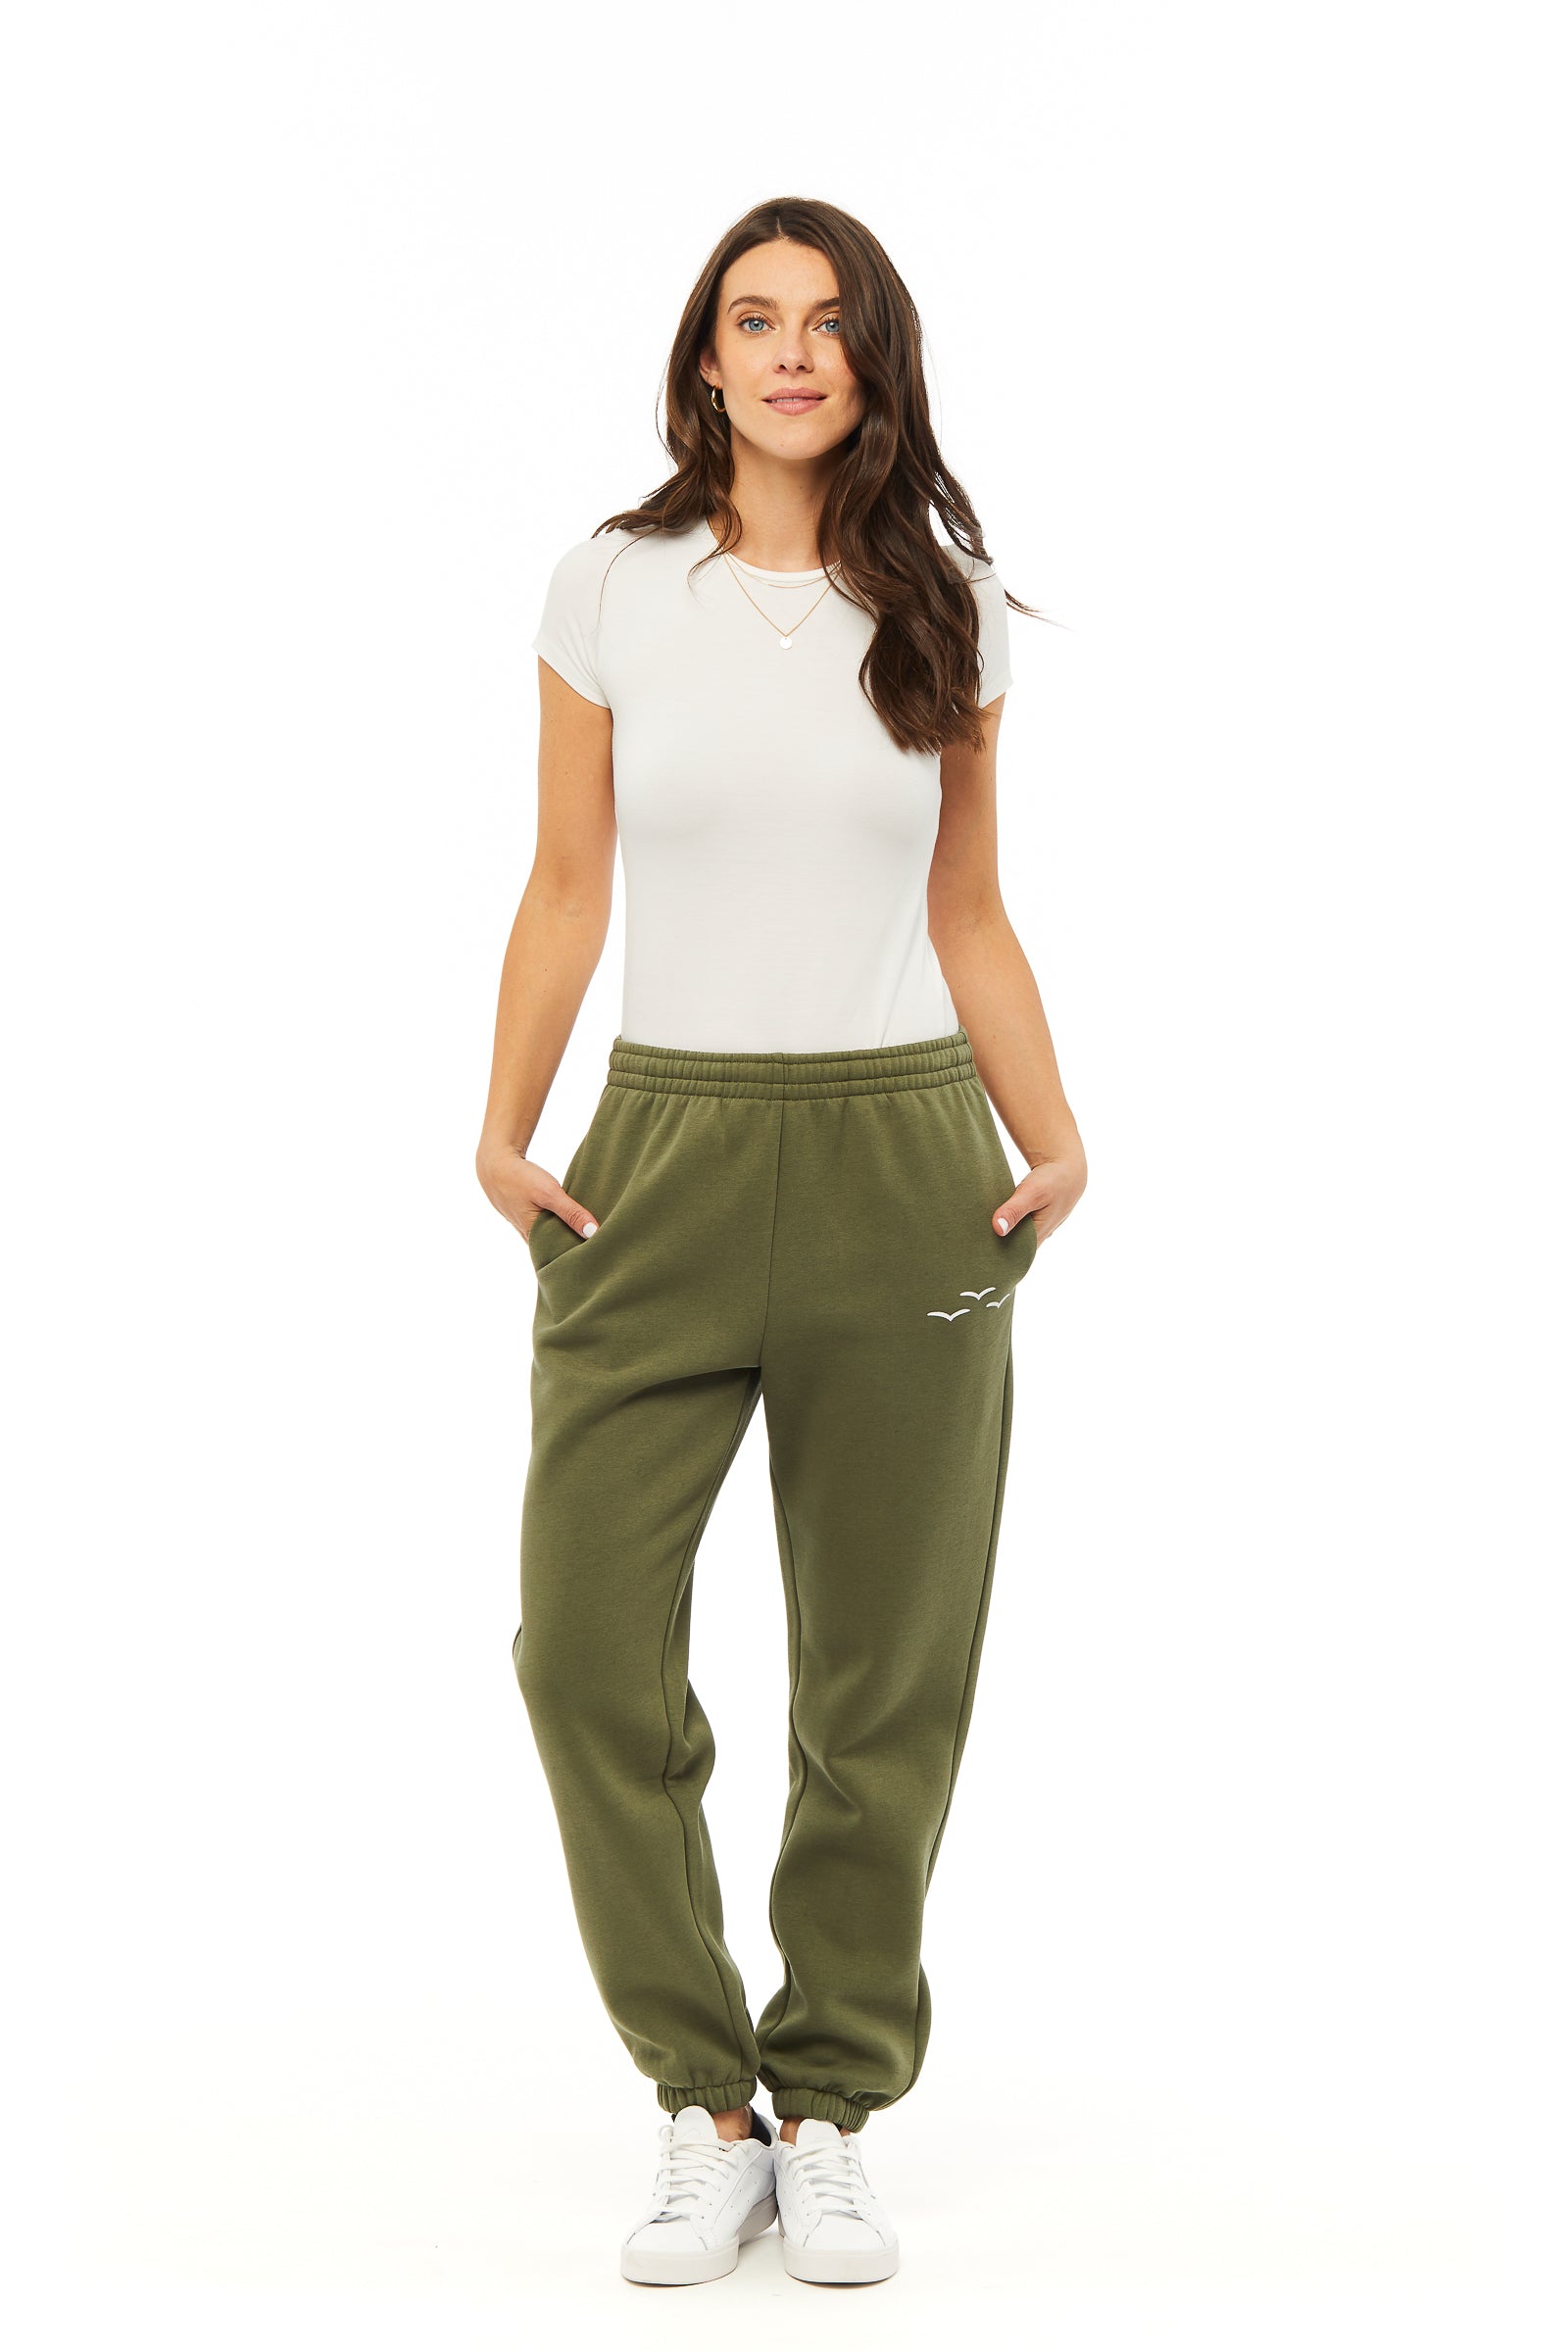 NOBERO Olivia Joggers Women's Solid Olive Green Color Slim Fit Night Sleep  Lounge Running Joggers Lower Wear Sweat Bottoms Track Pants Outfit for